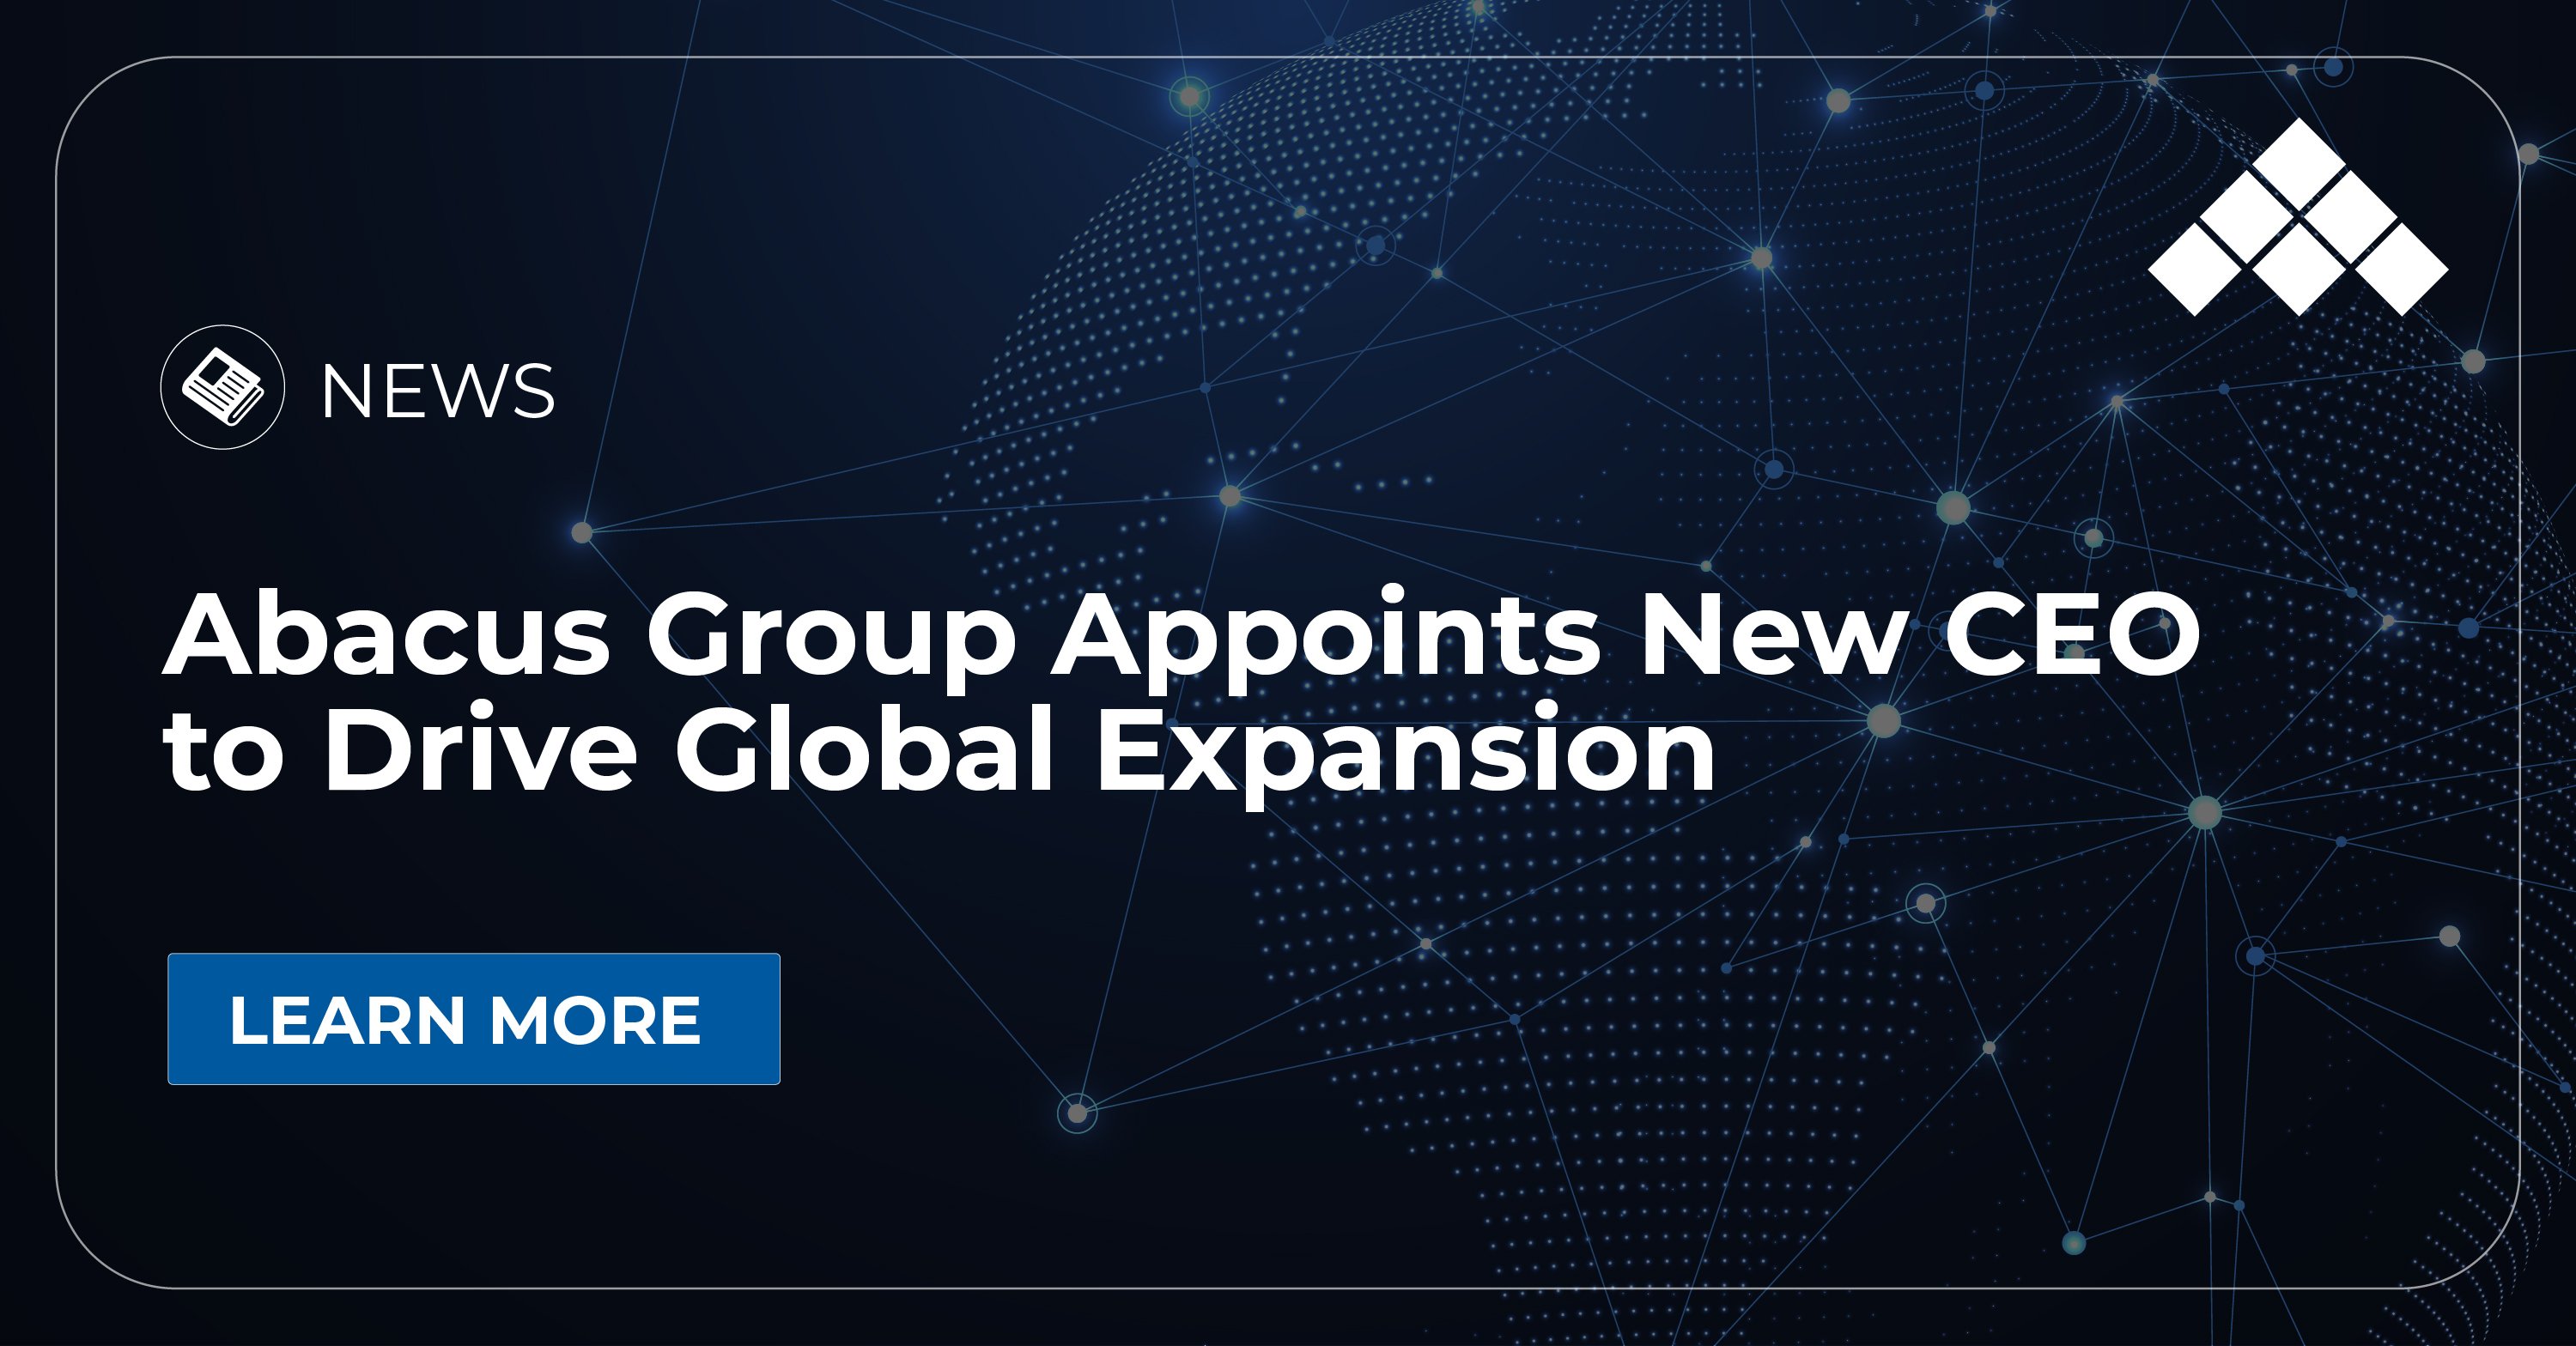 Abacus Group Appoints New CEO to Drive Global Expansion